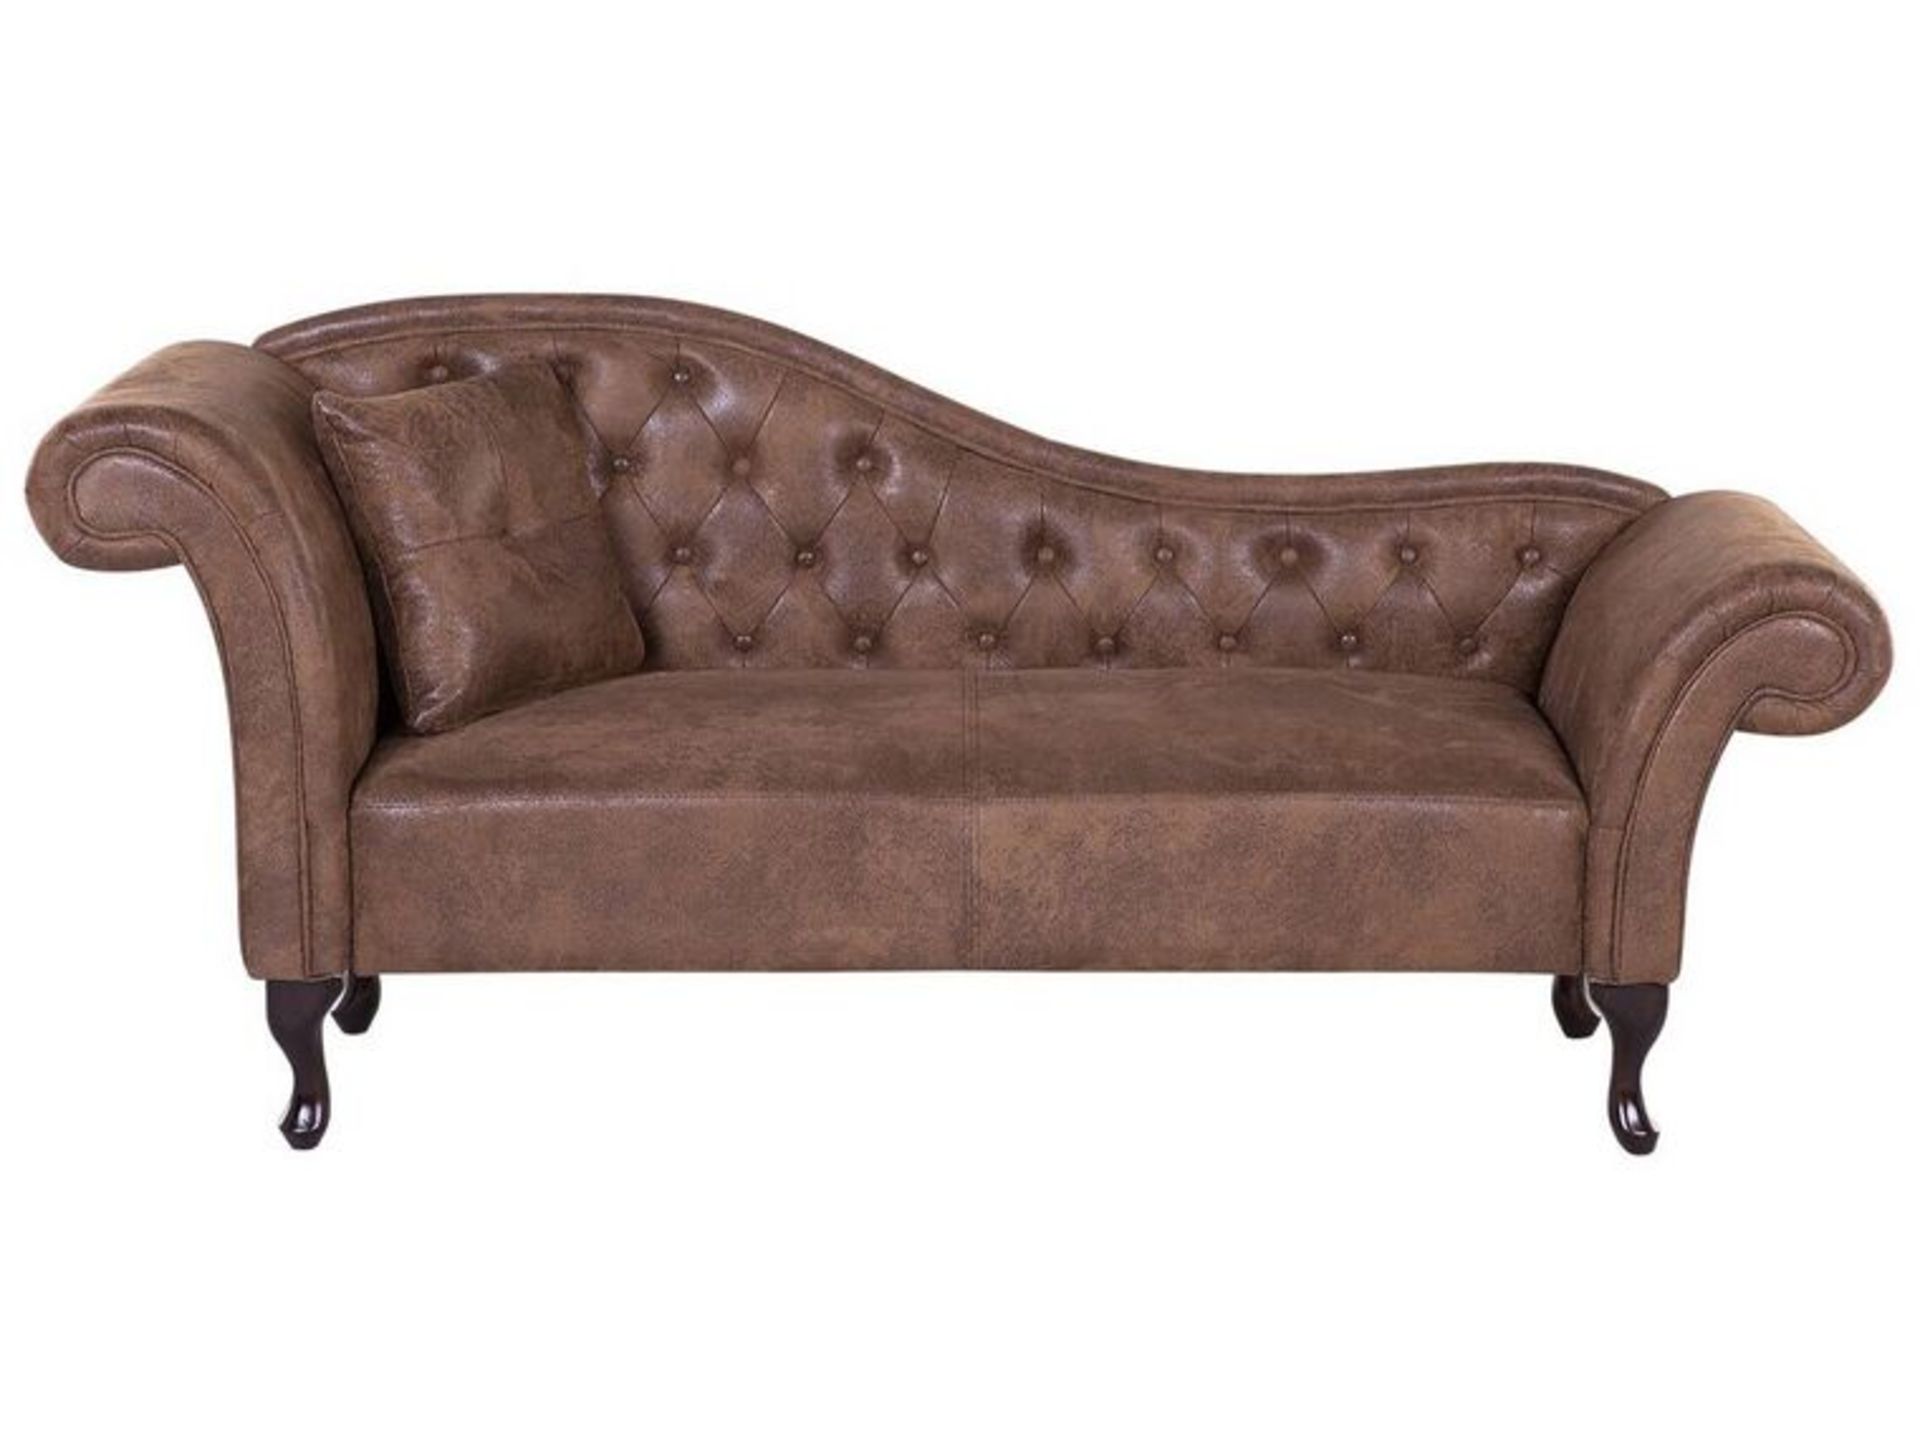 Lattes Left Hand Chaise Lounge Faux Suede Brown. - ER. This classic chaise lounge is the perfect